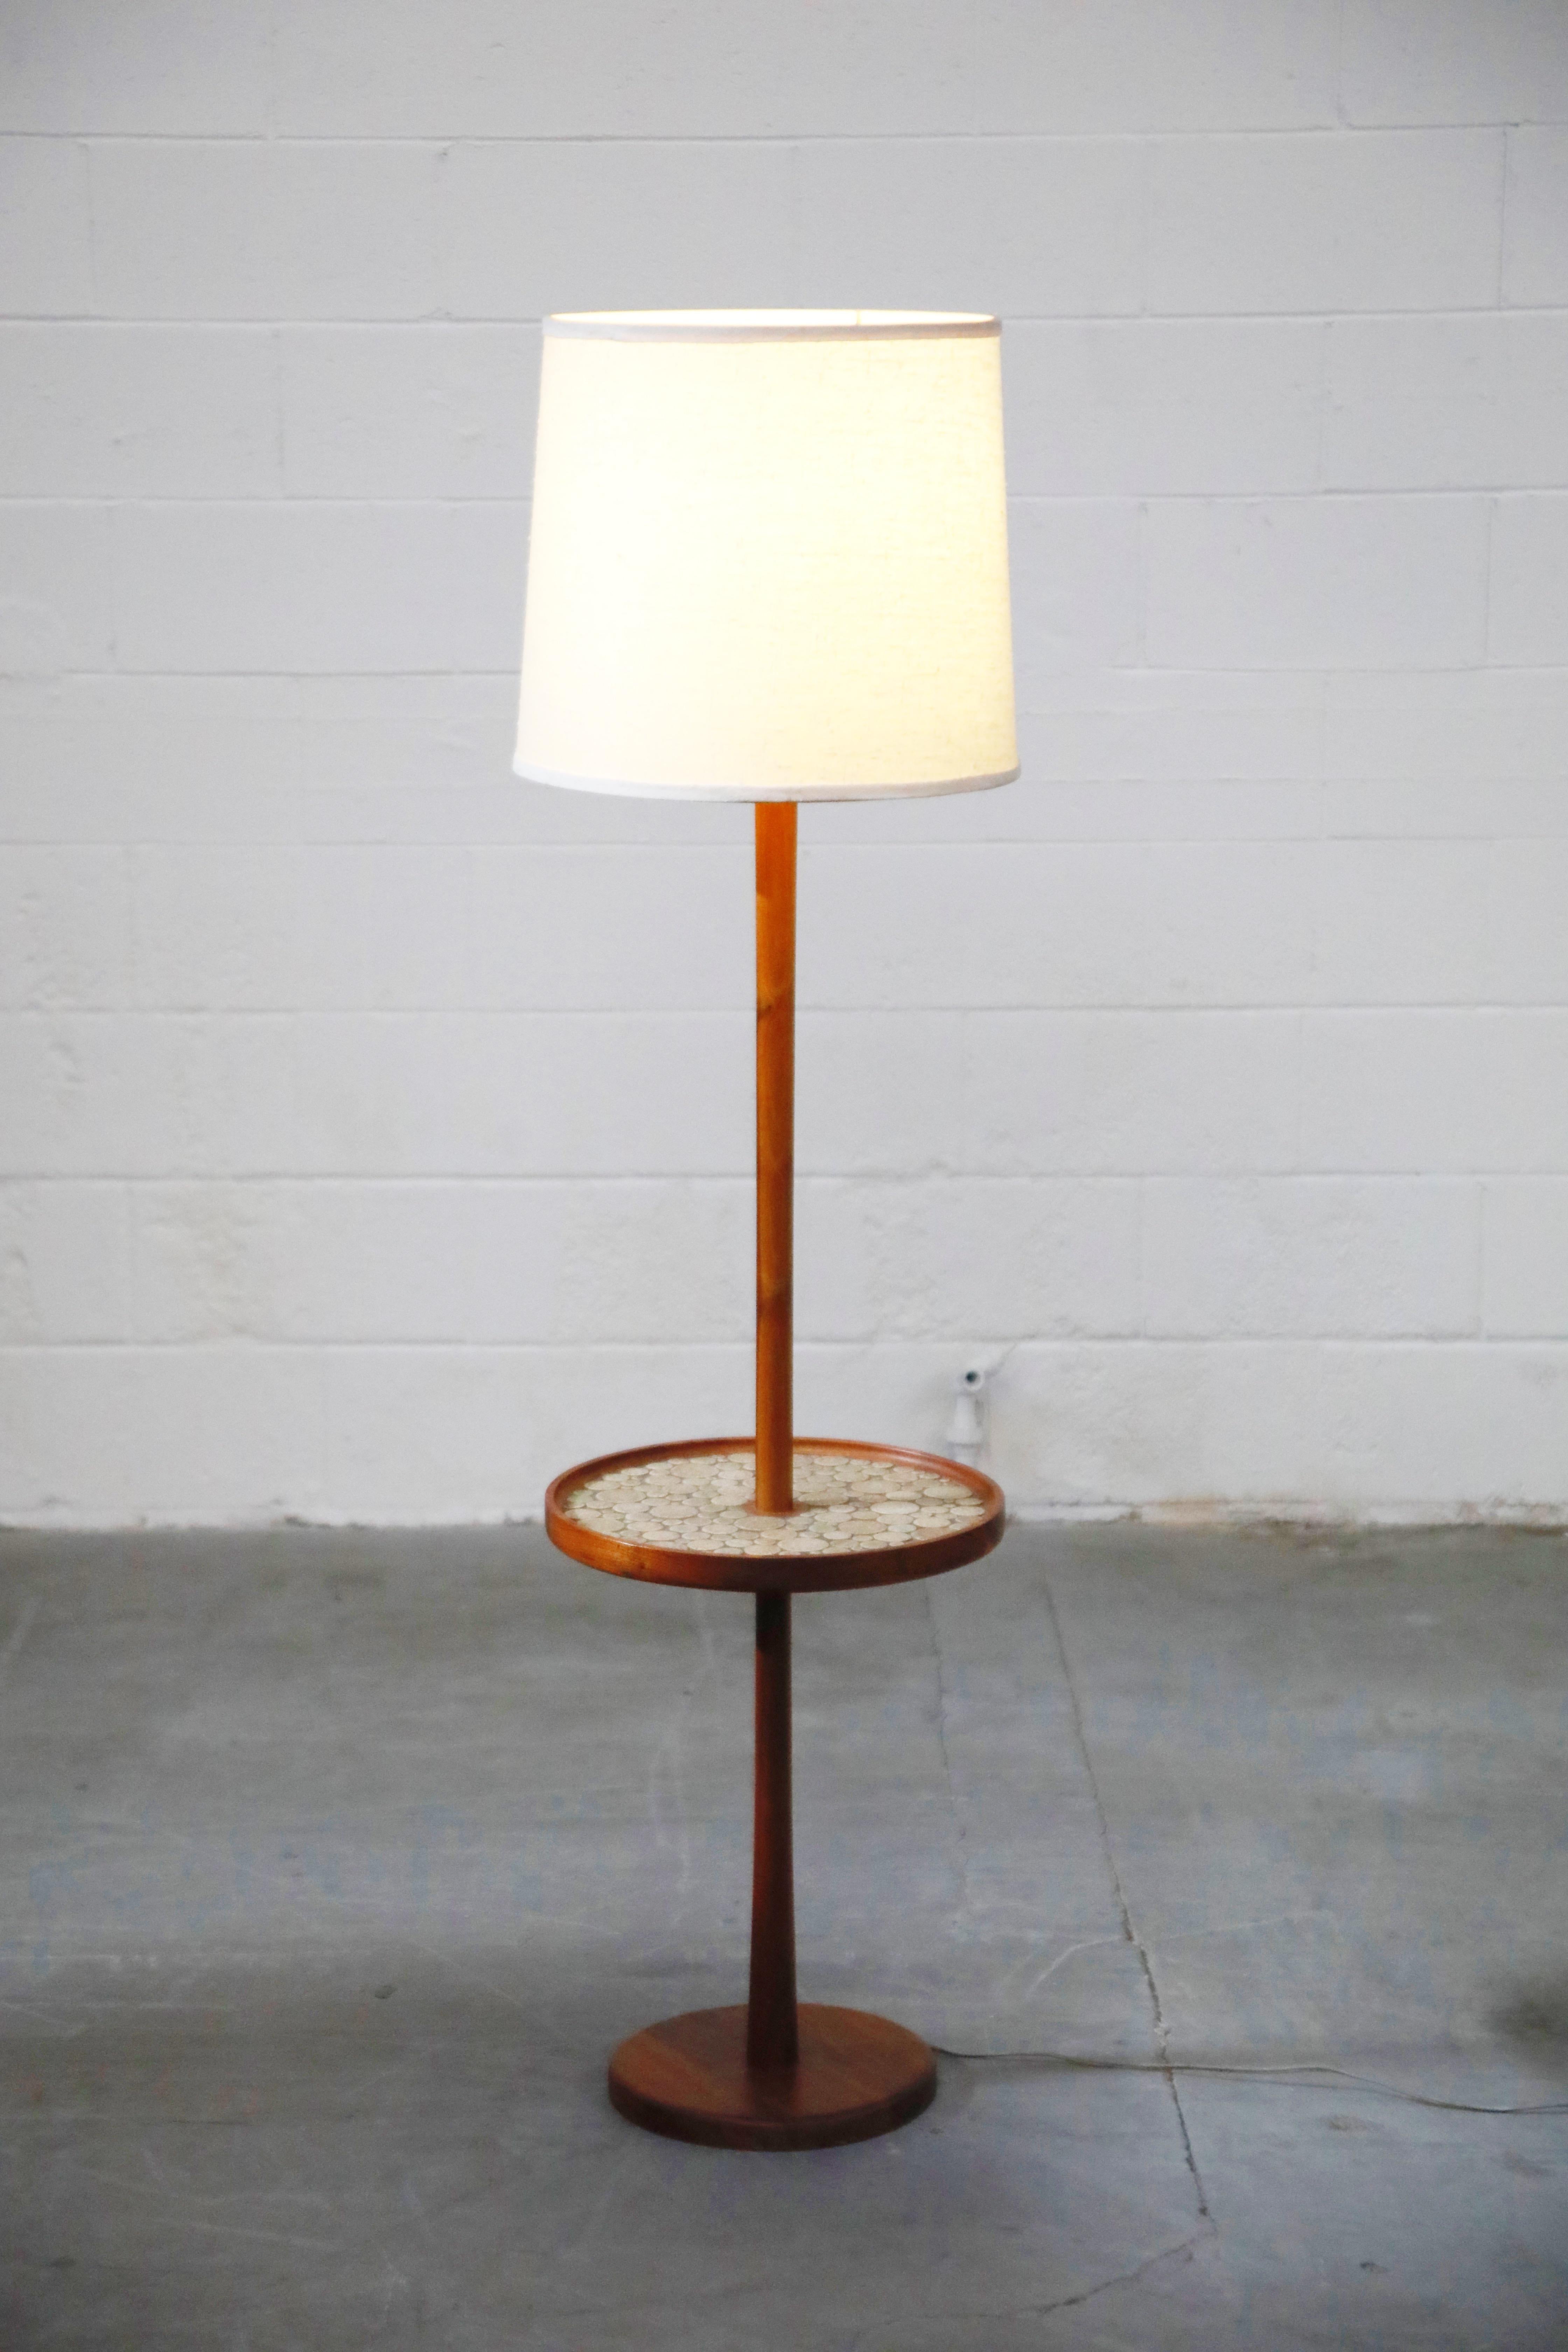 This classy floor lamp with built-in side table by Gordon and Jane Martz for Marshall Studios is in incredible original vintage condition with a beautiful light patina. The built-in round side table is covered in round white and light colored